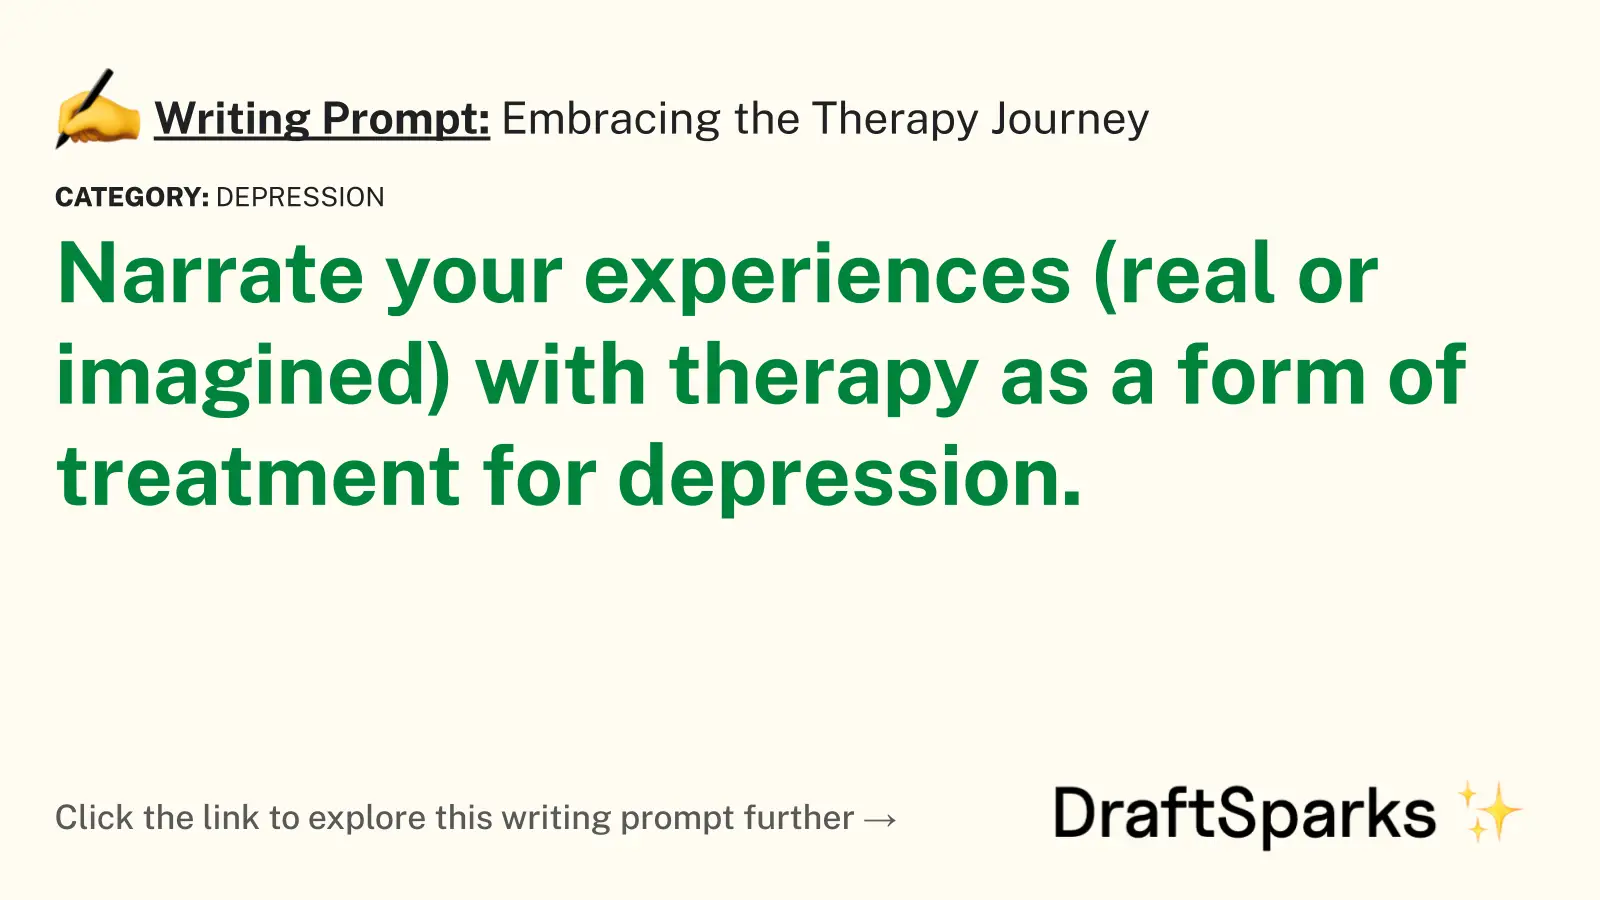 Embracing the Therapy Journey